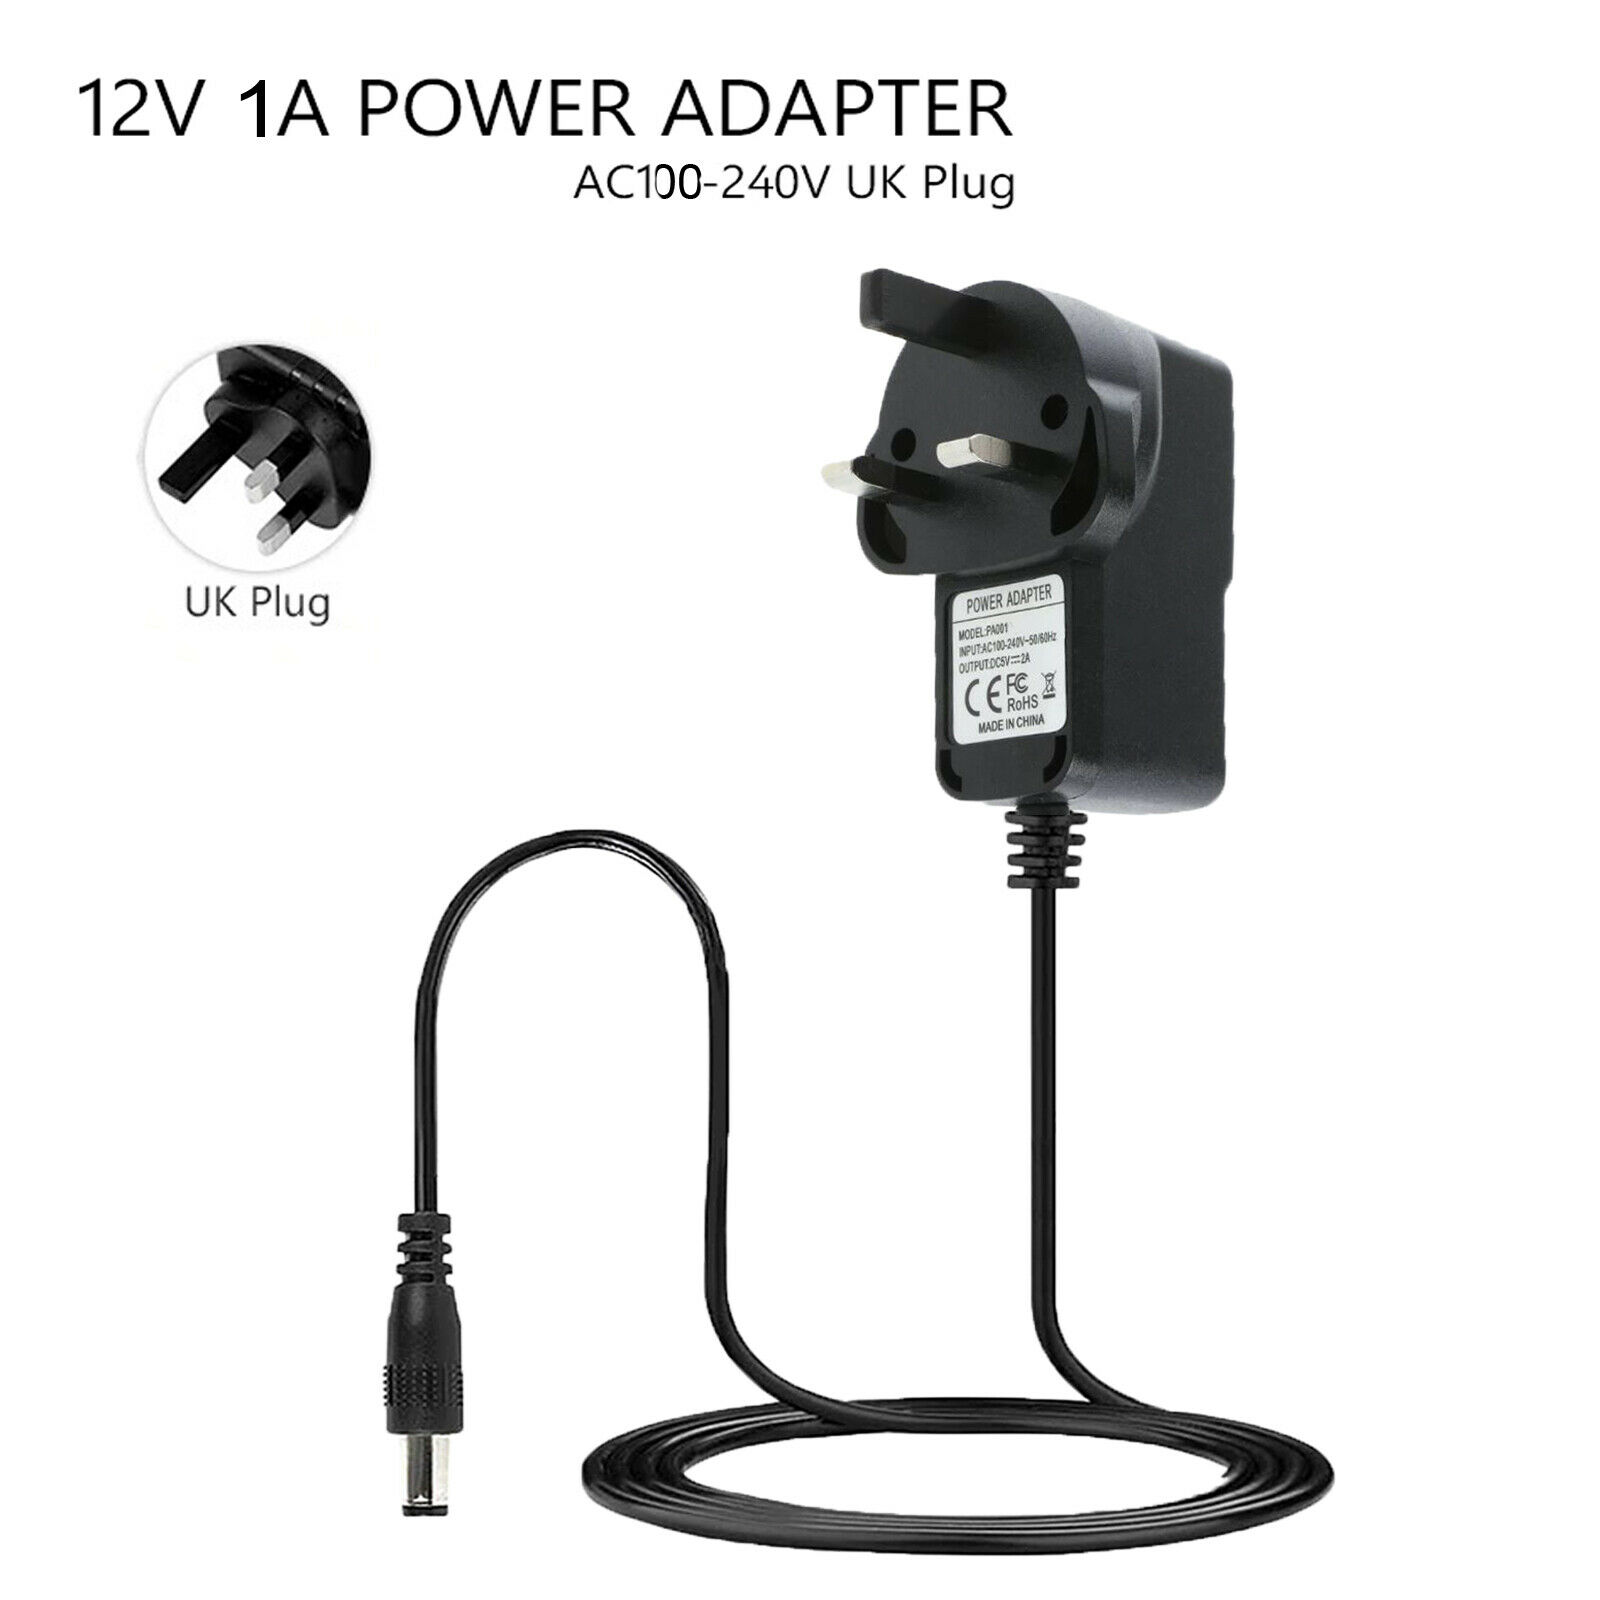 12V 1A DC PSU Charger Power Supply Adapter for CCTV Camera LED Strip UK Plug Connector A: Male Connection Split/Dup